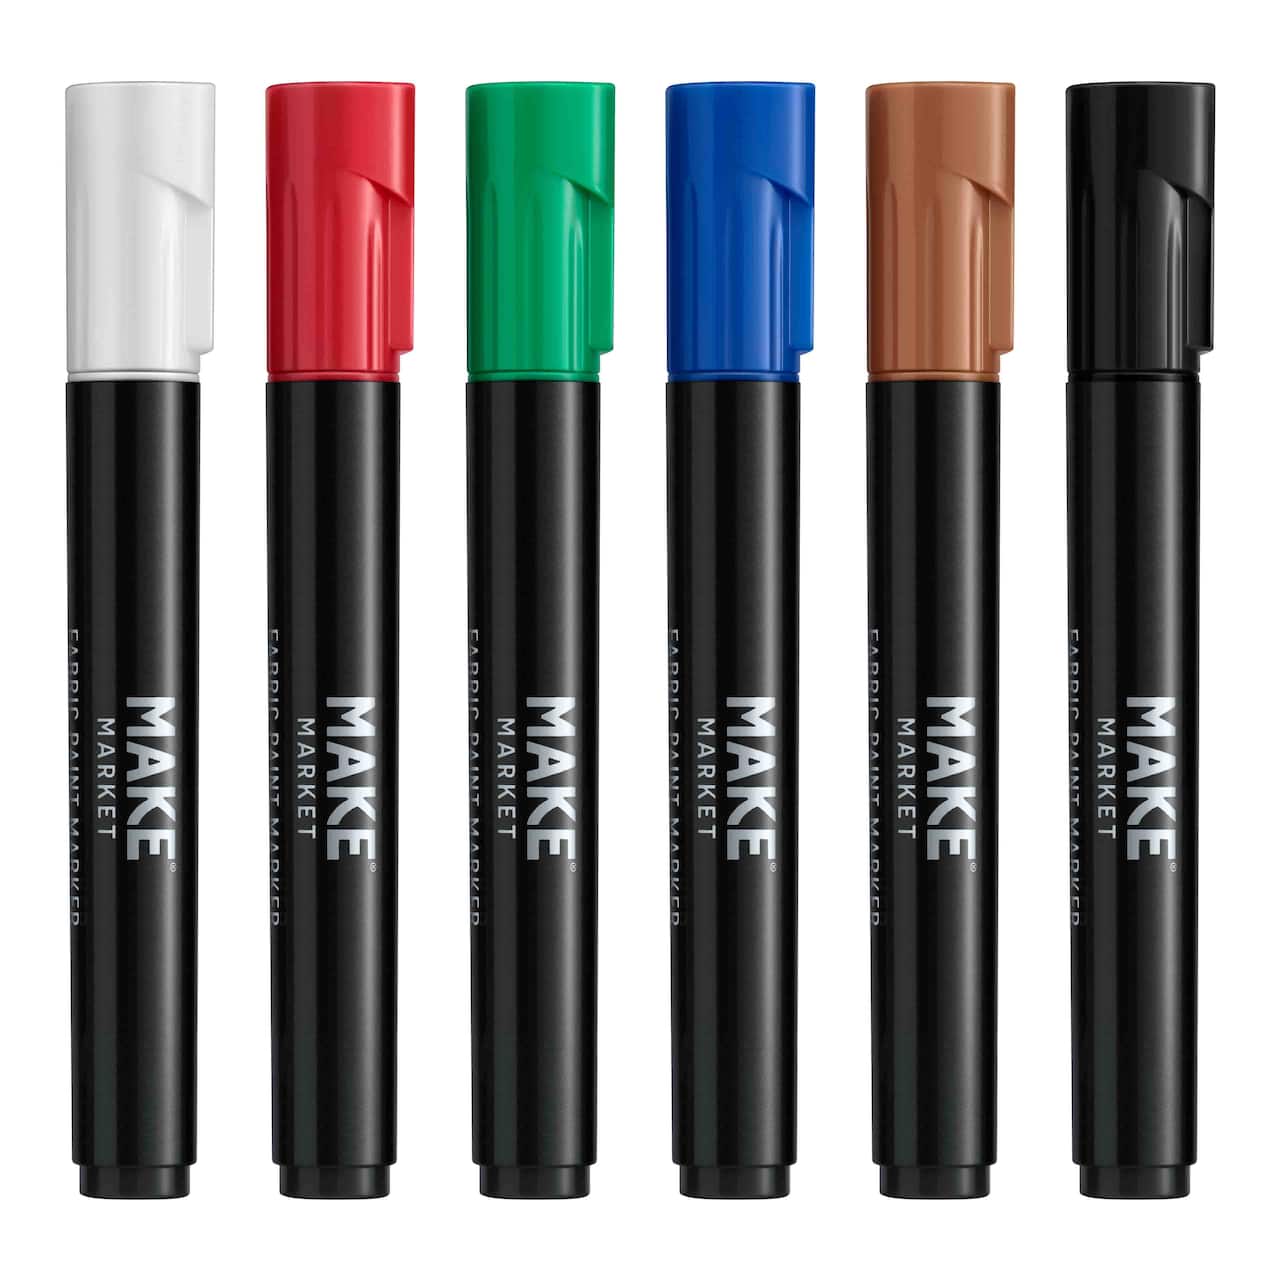 Primary Fabric Paint Marker Set by Make Market®